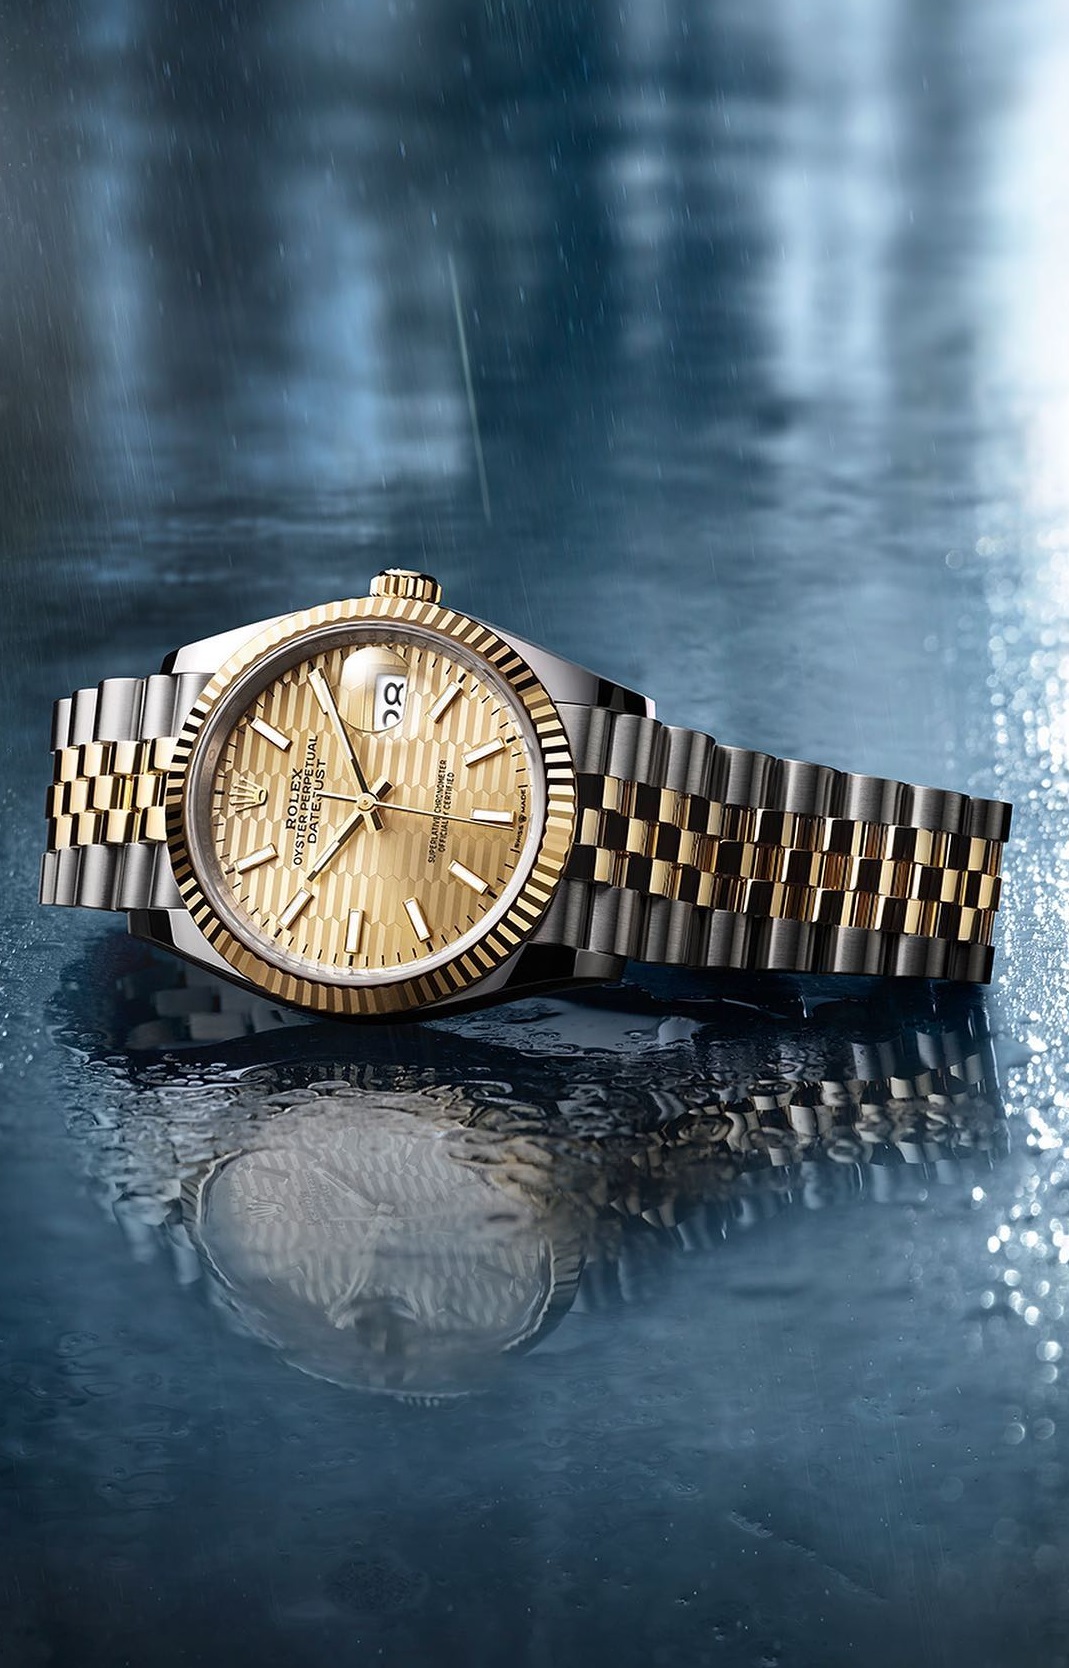 Rolex Oyster Perpetual range